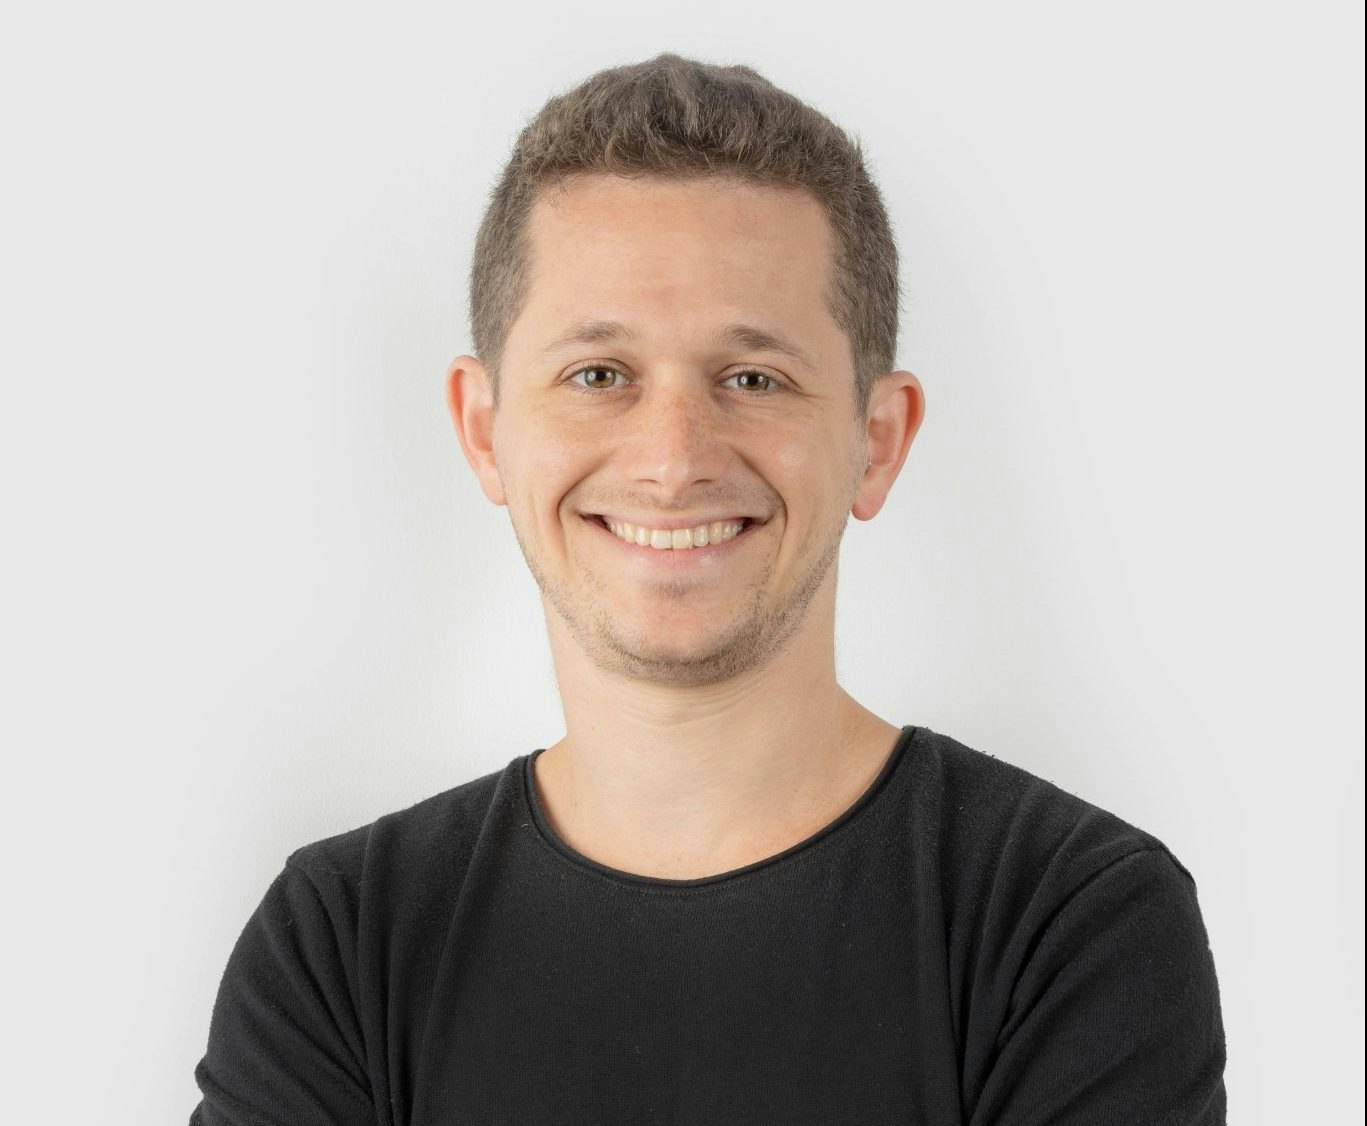 An image of Aviv Wolff, CEO and founder of Remilk